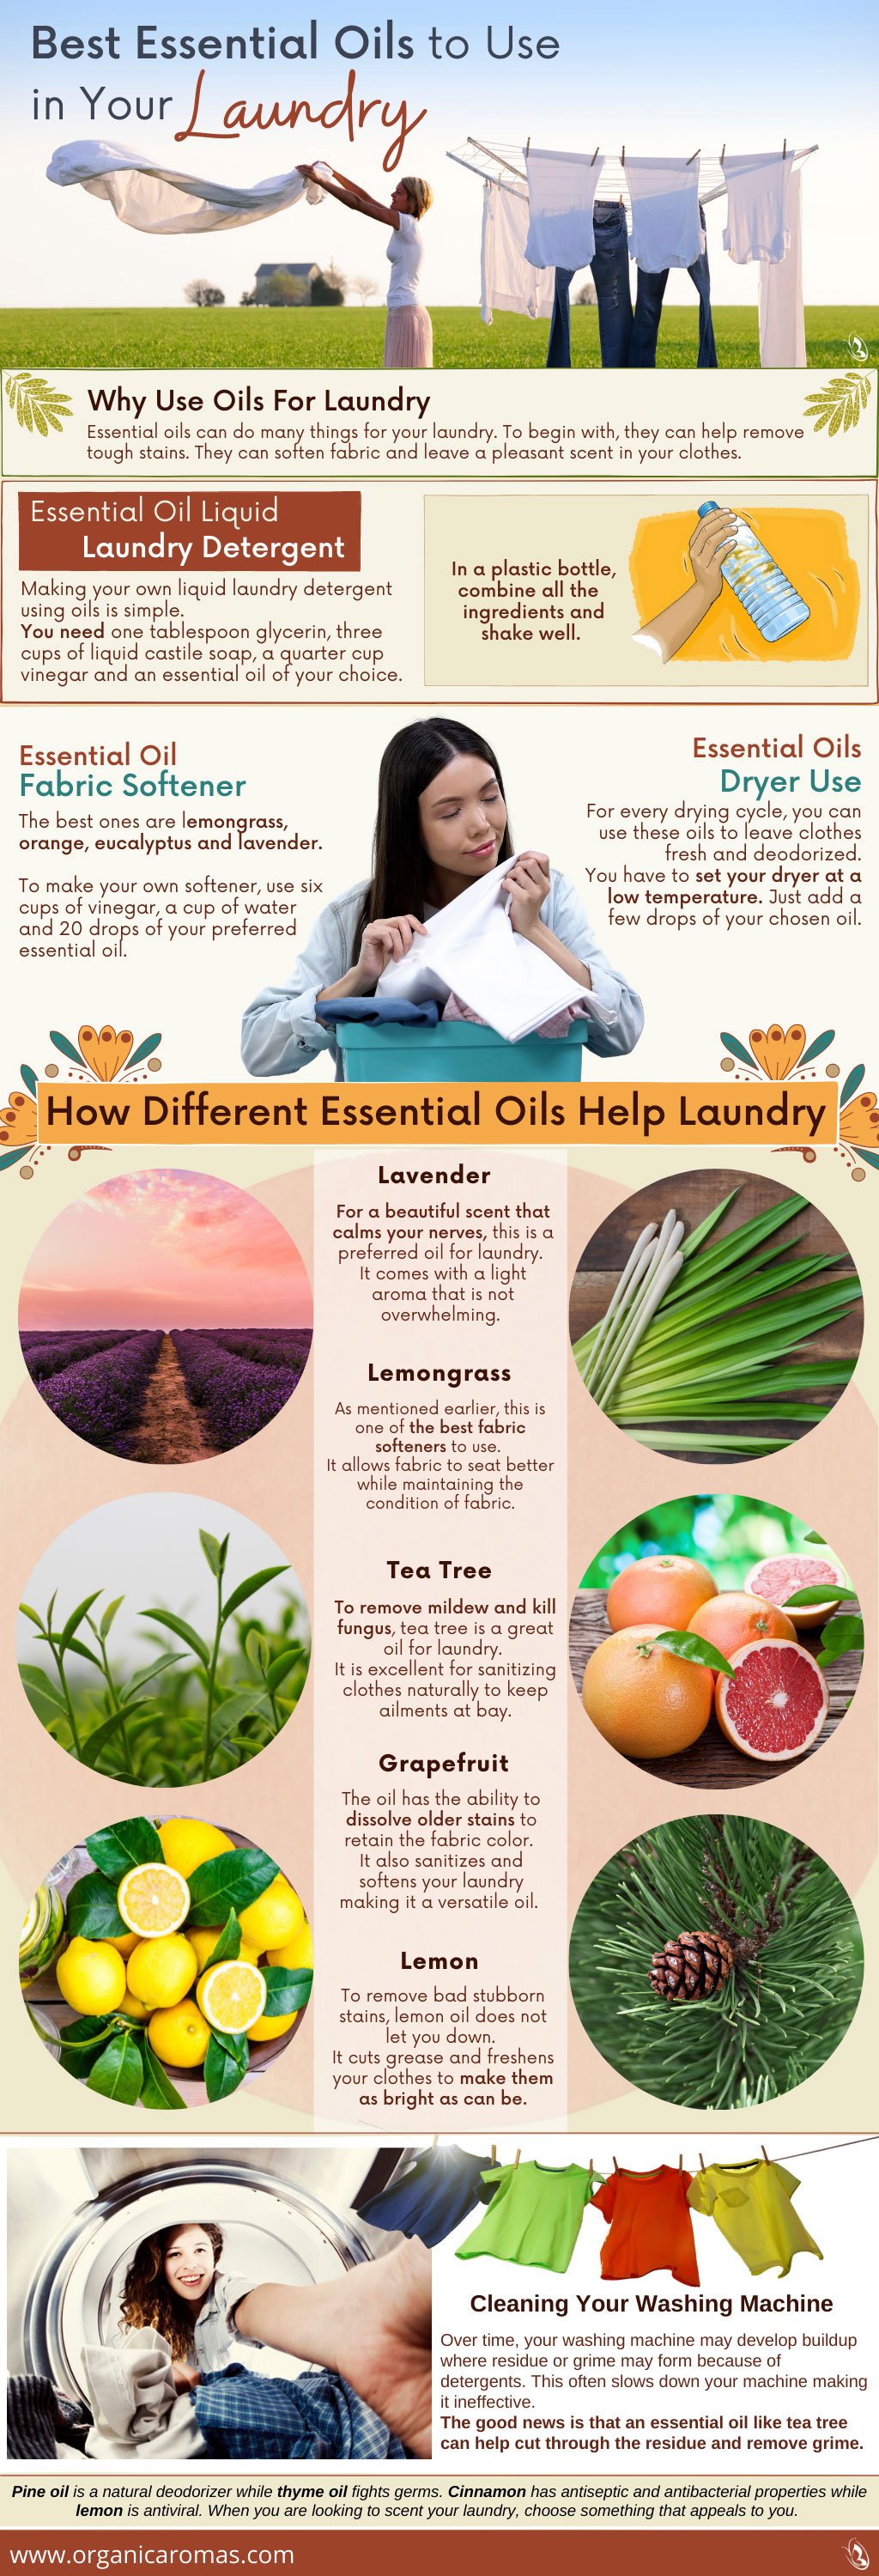 How to Get The Smell Out Of Used Essential Oil Bottles - TheMamasGirls